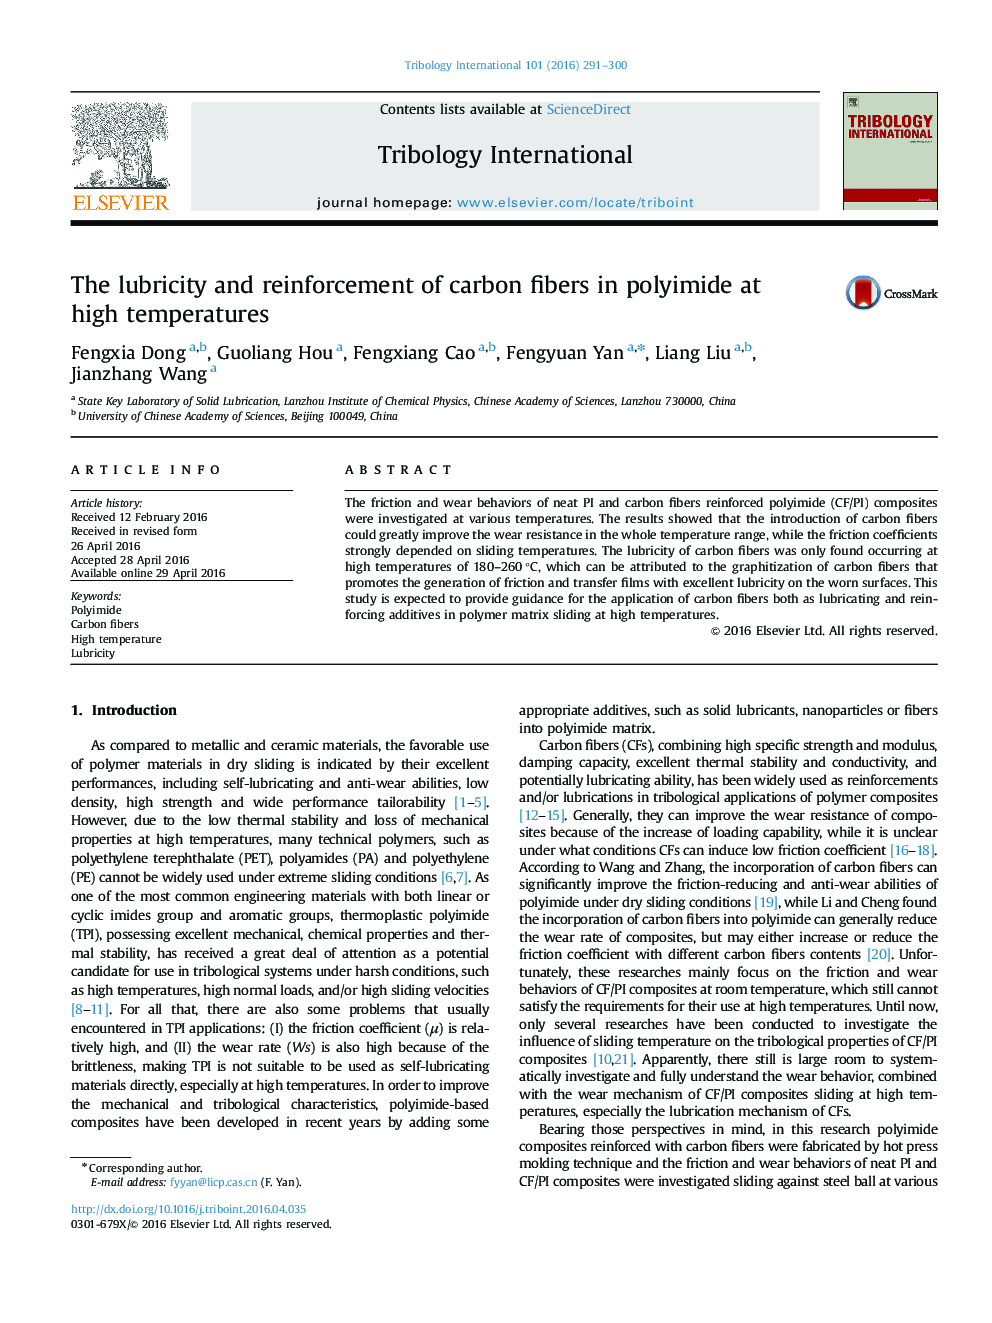 The lubricity and reinforcement of carbon fibers in polyimide at high temperatures